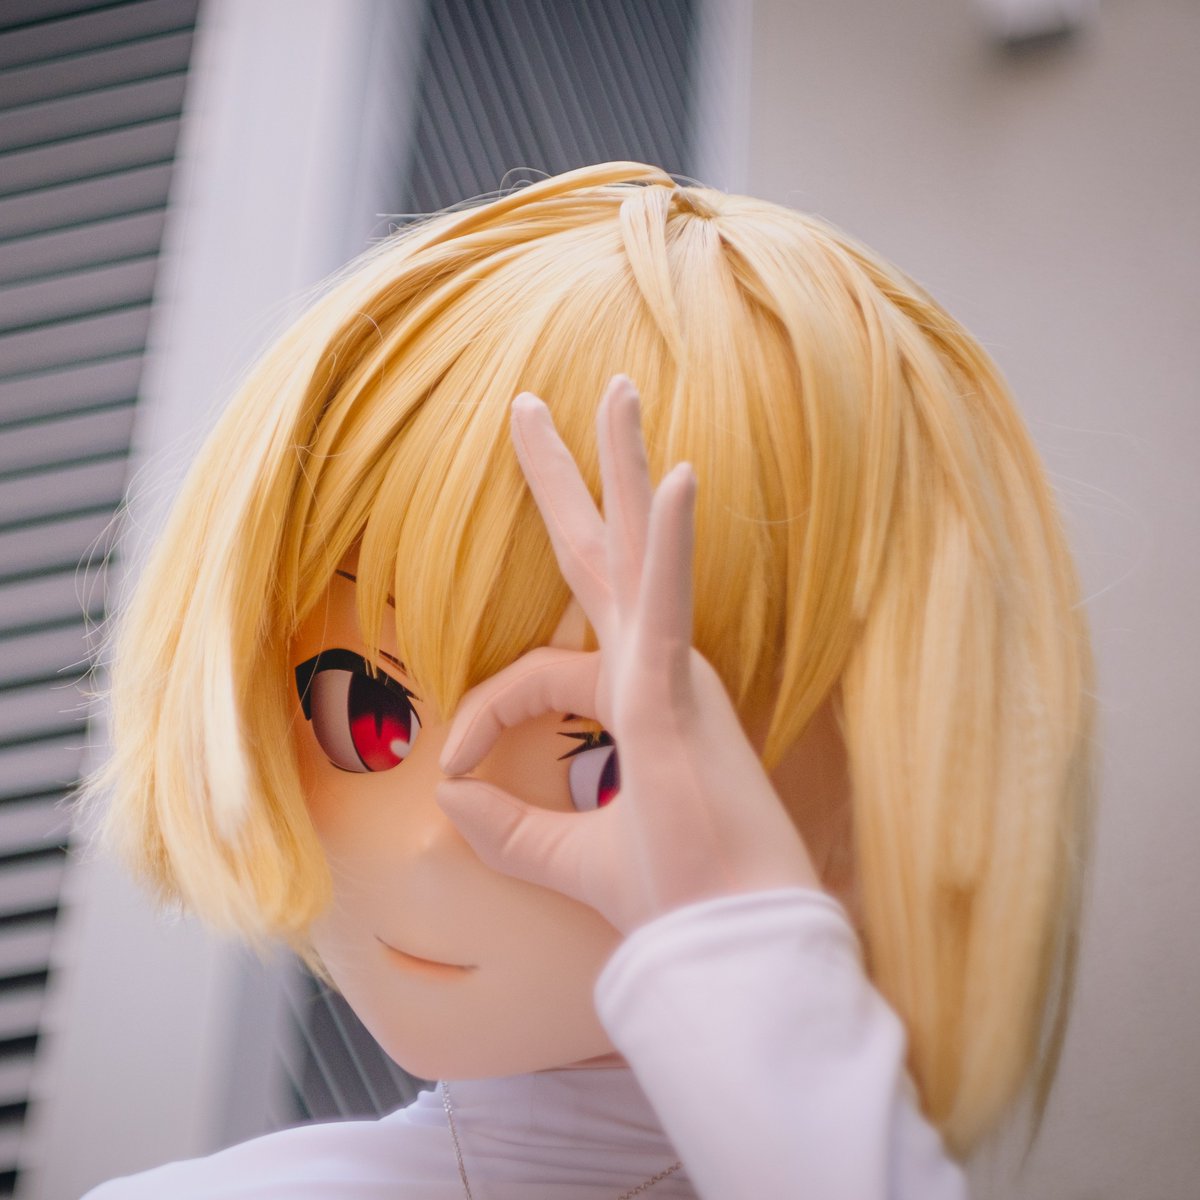 I see you on the weekend~
have fun everyone!
#Tsukihime #Arcueid #月姫 #アルクェイド